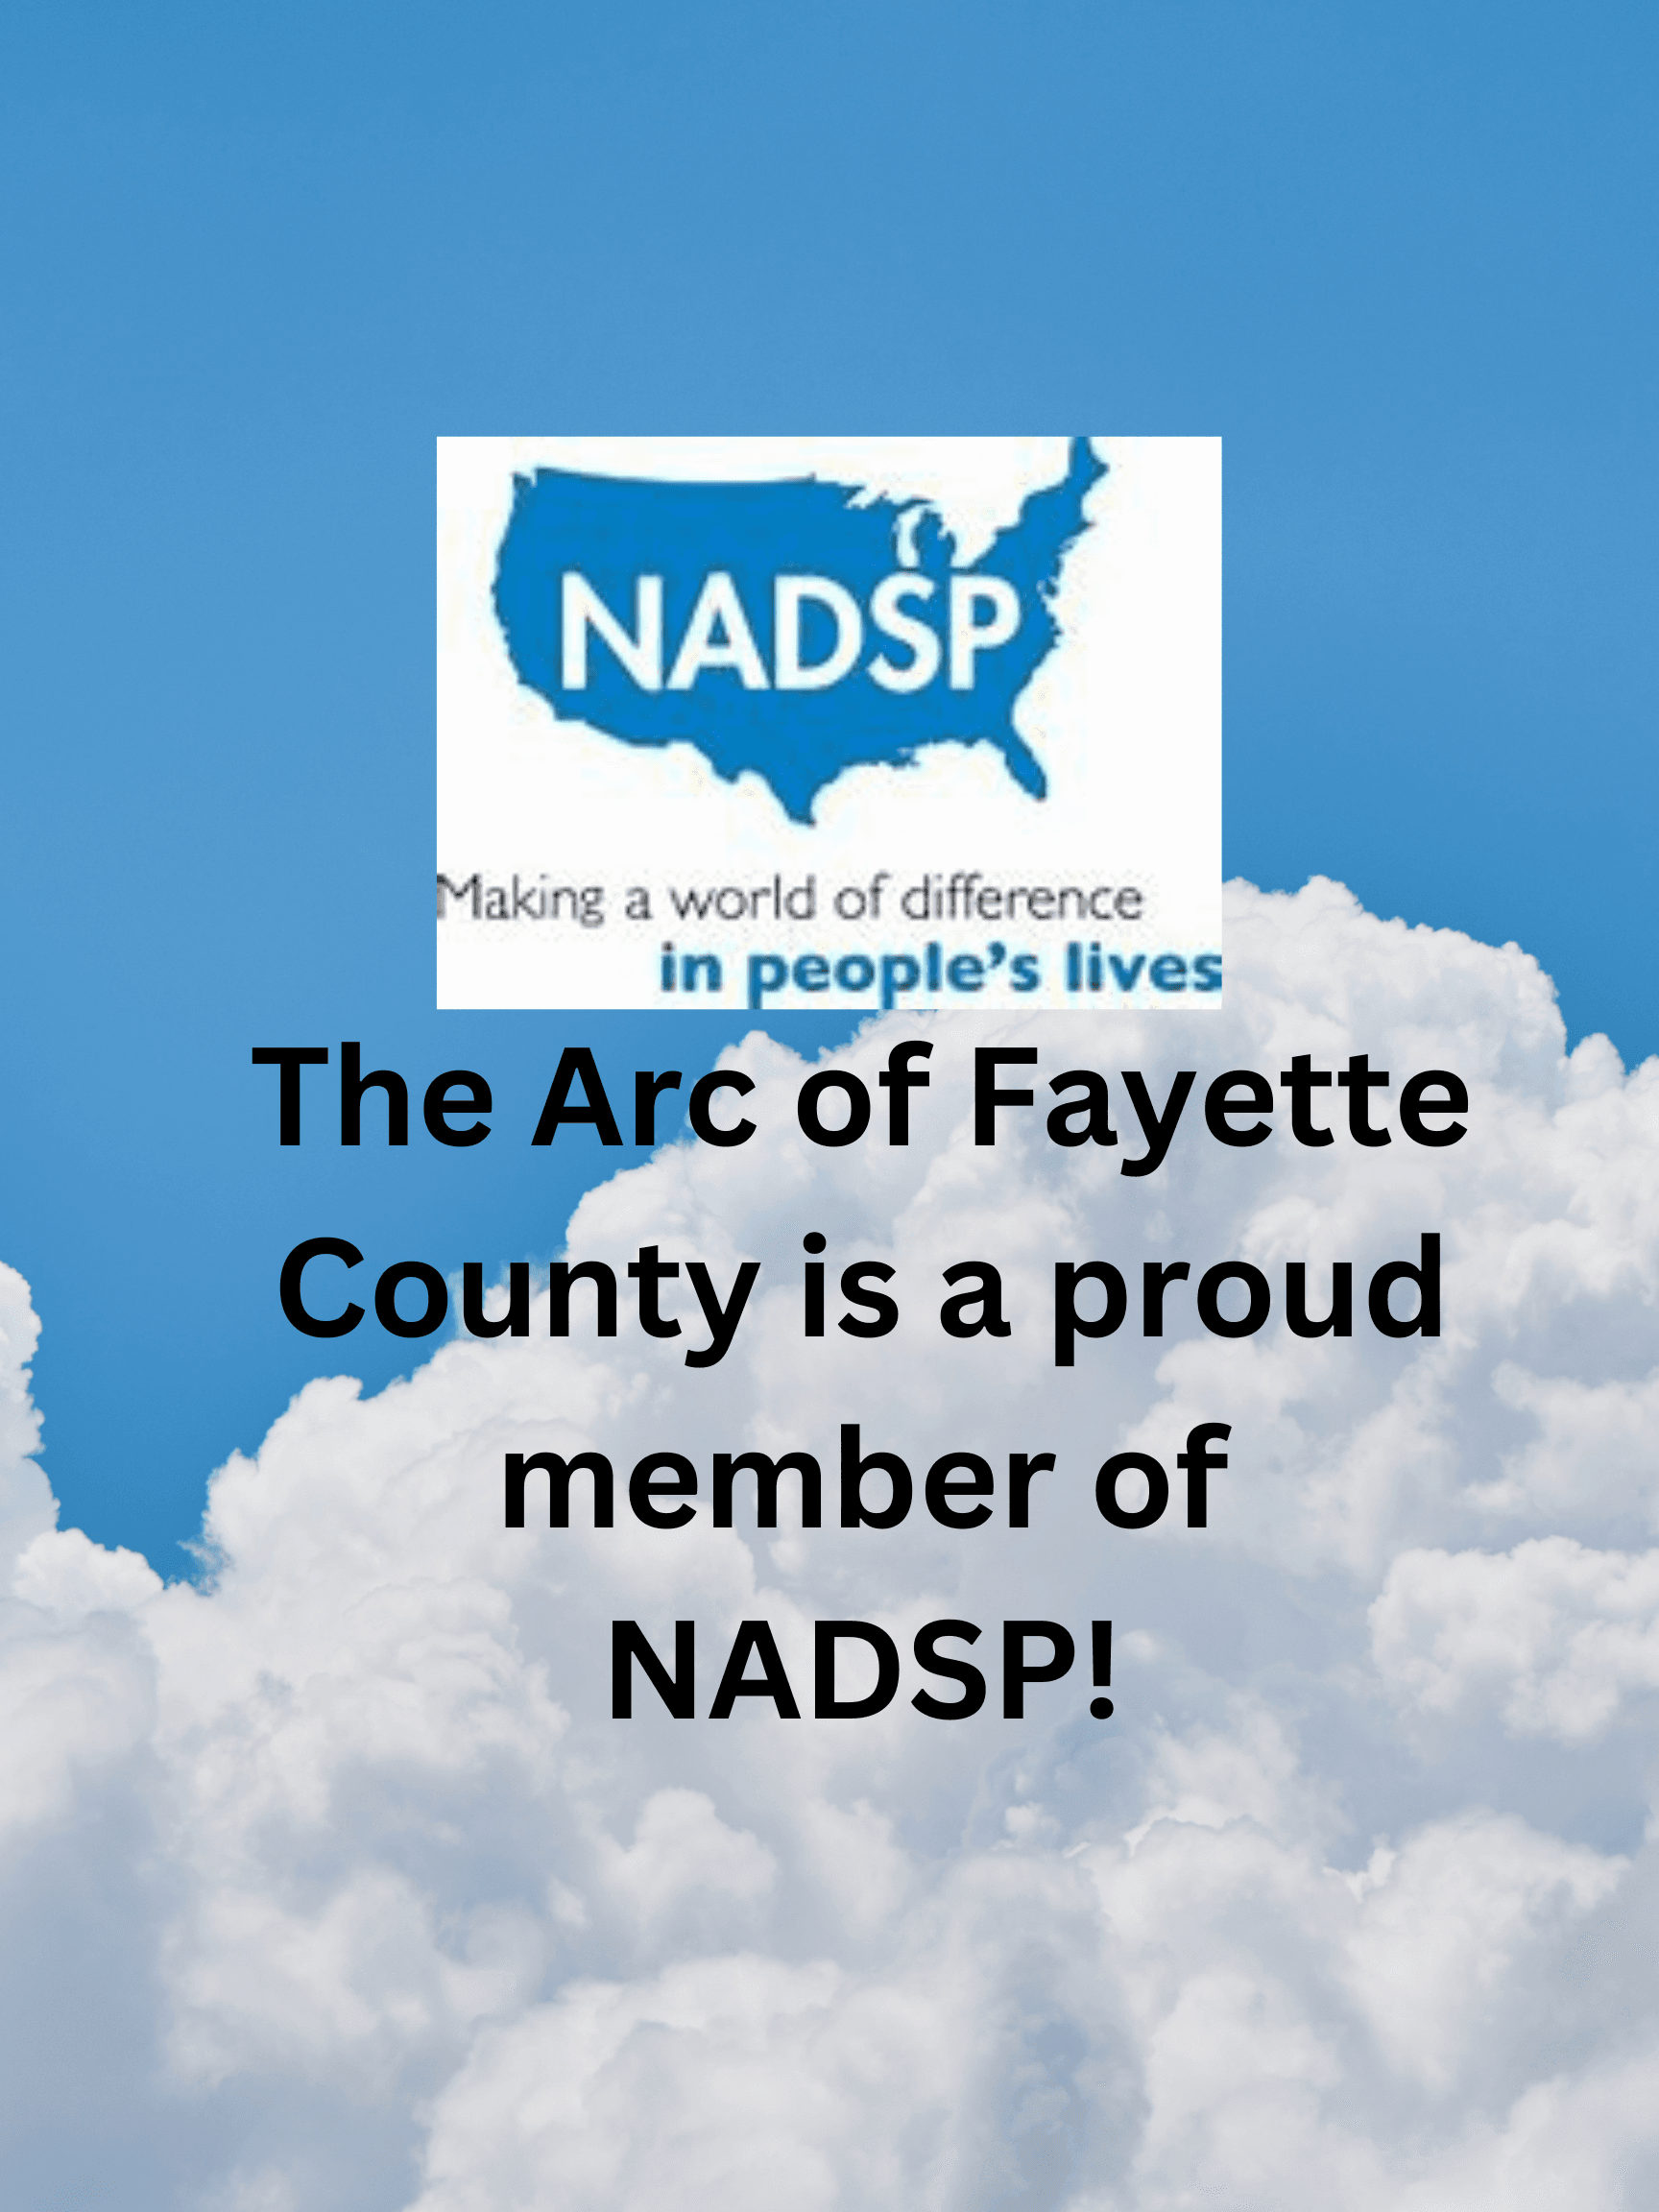 The Arc of Fayette County is a member of NADSP